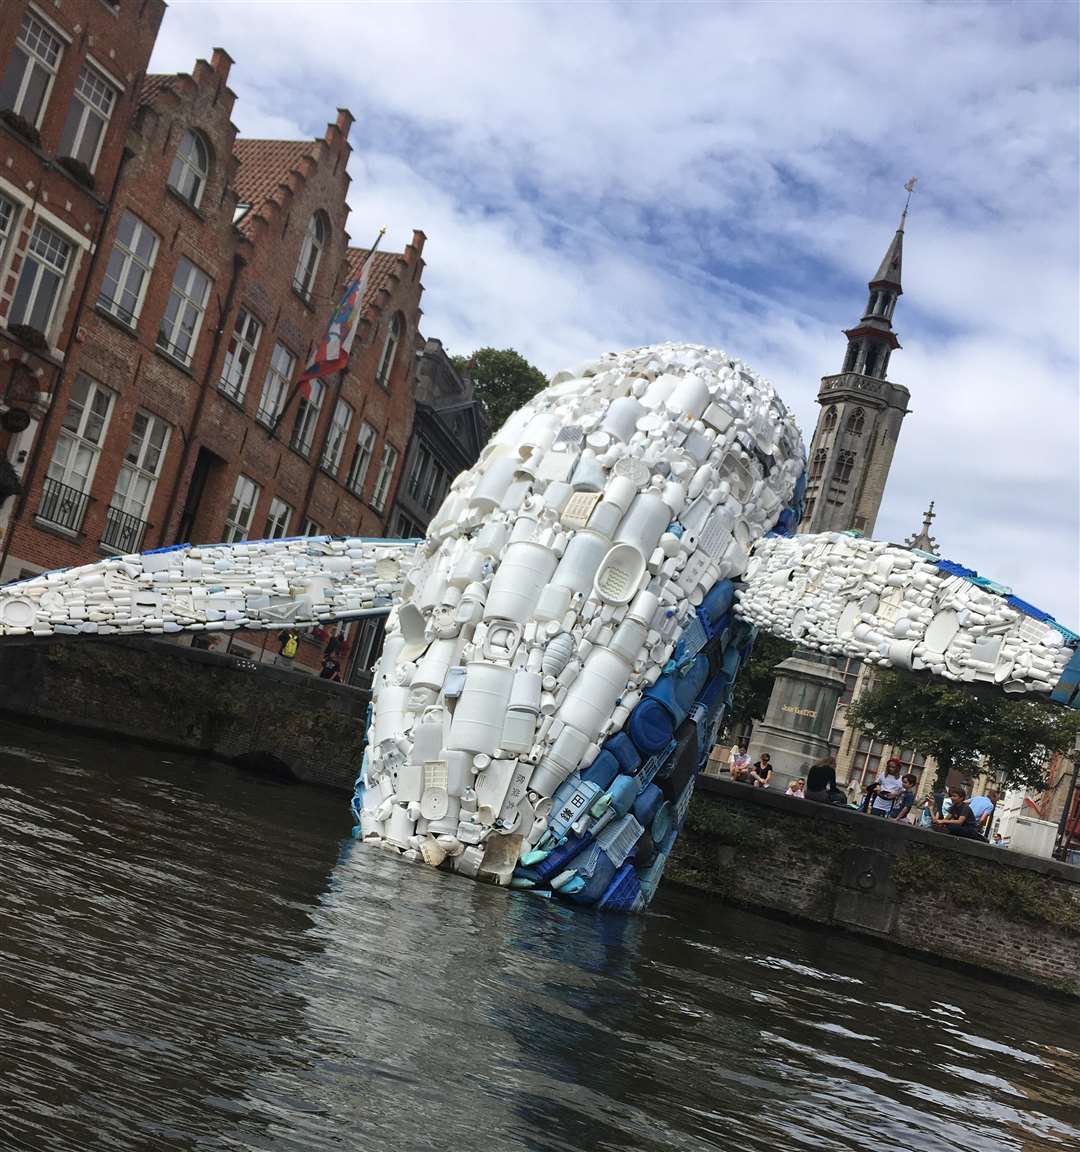 The plastic whale was part of the Triennial installations dotted around Bruges